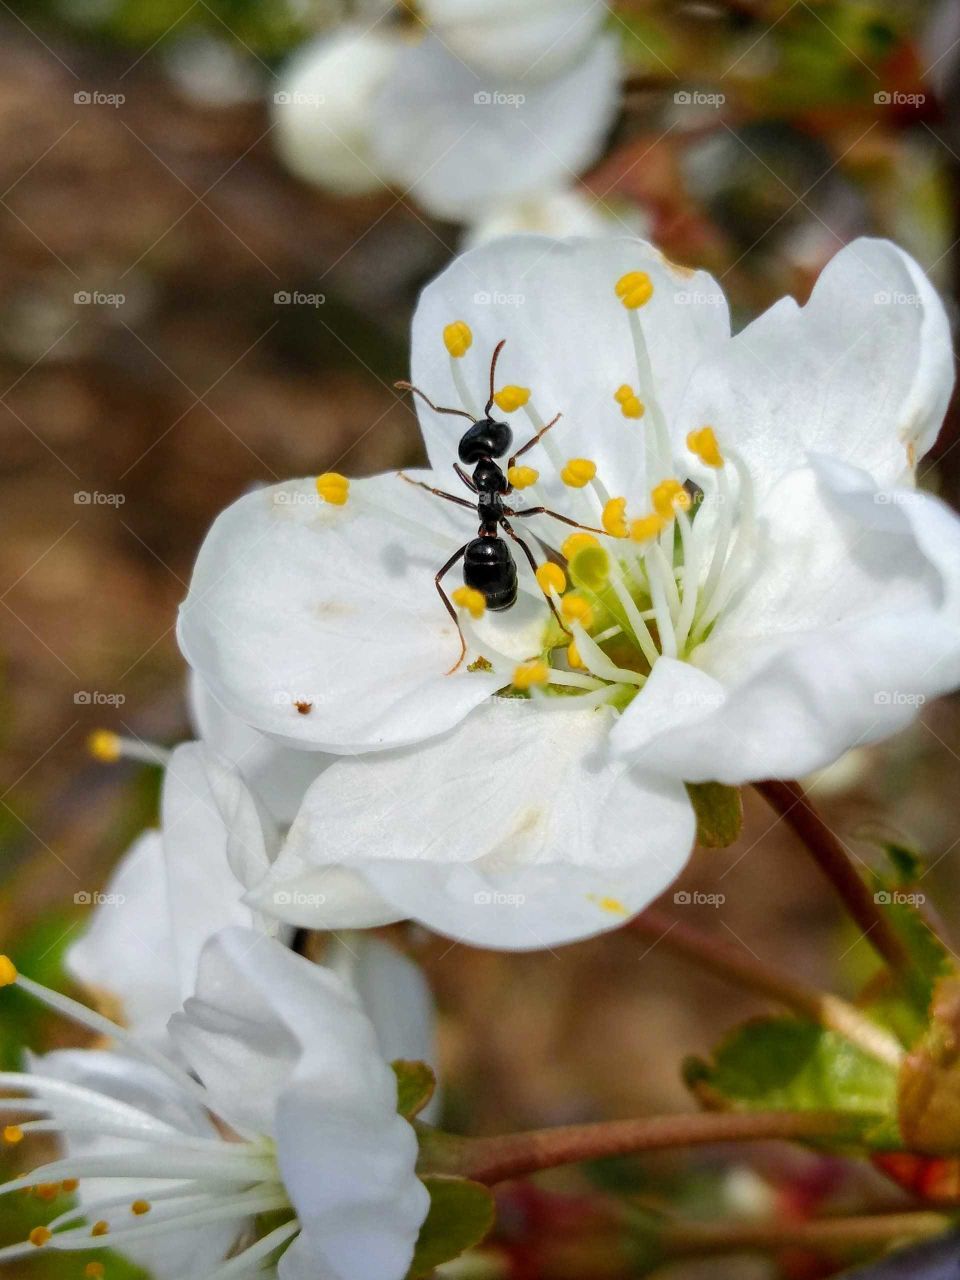 ant on a blossoming apple tree